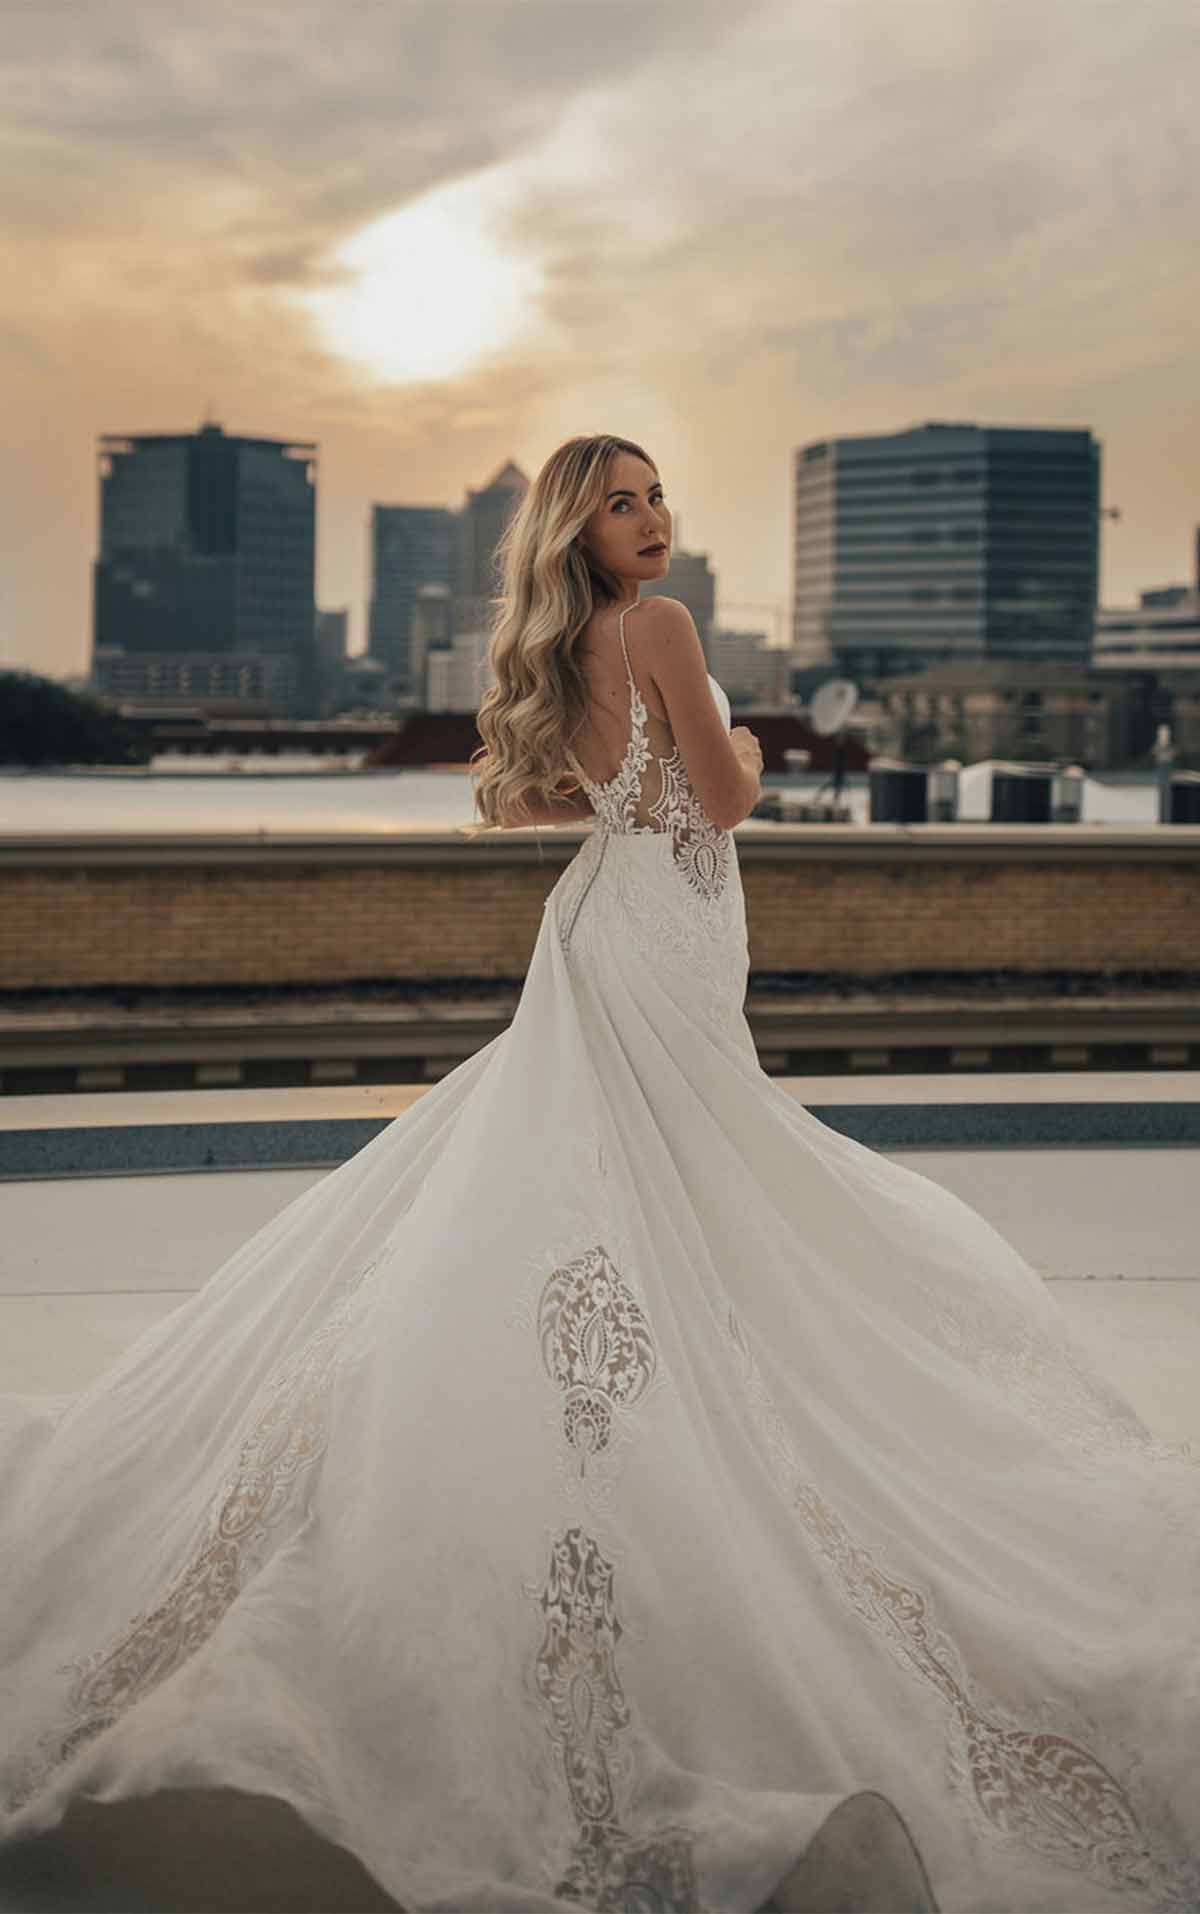 delta Embroidered Boho Wedding Dress with Textured Lace and Plunging Sweetheart Neckline  by All Who Wander